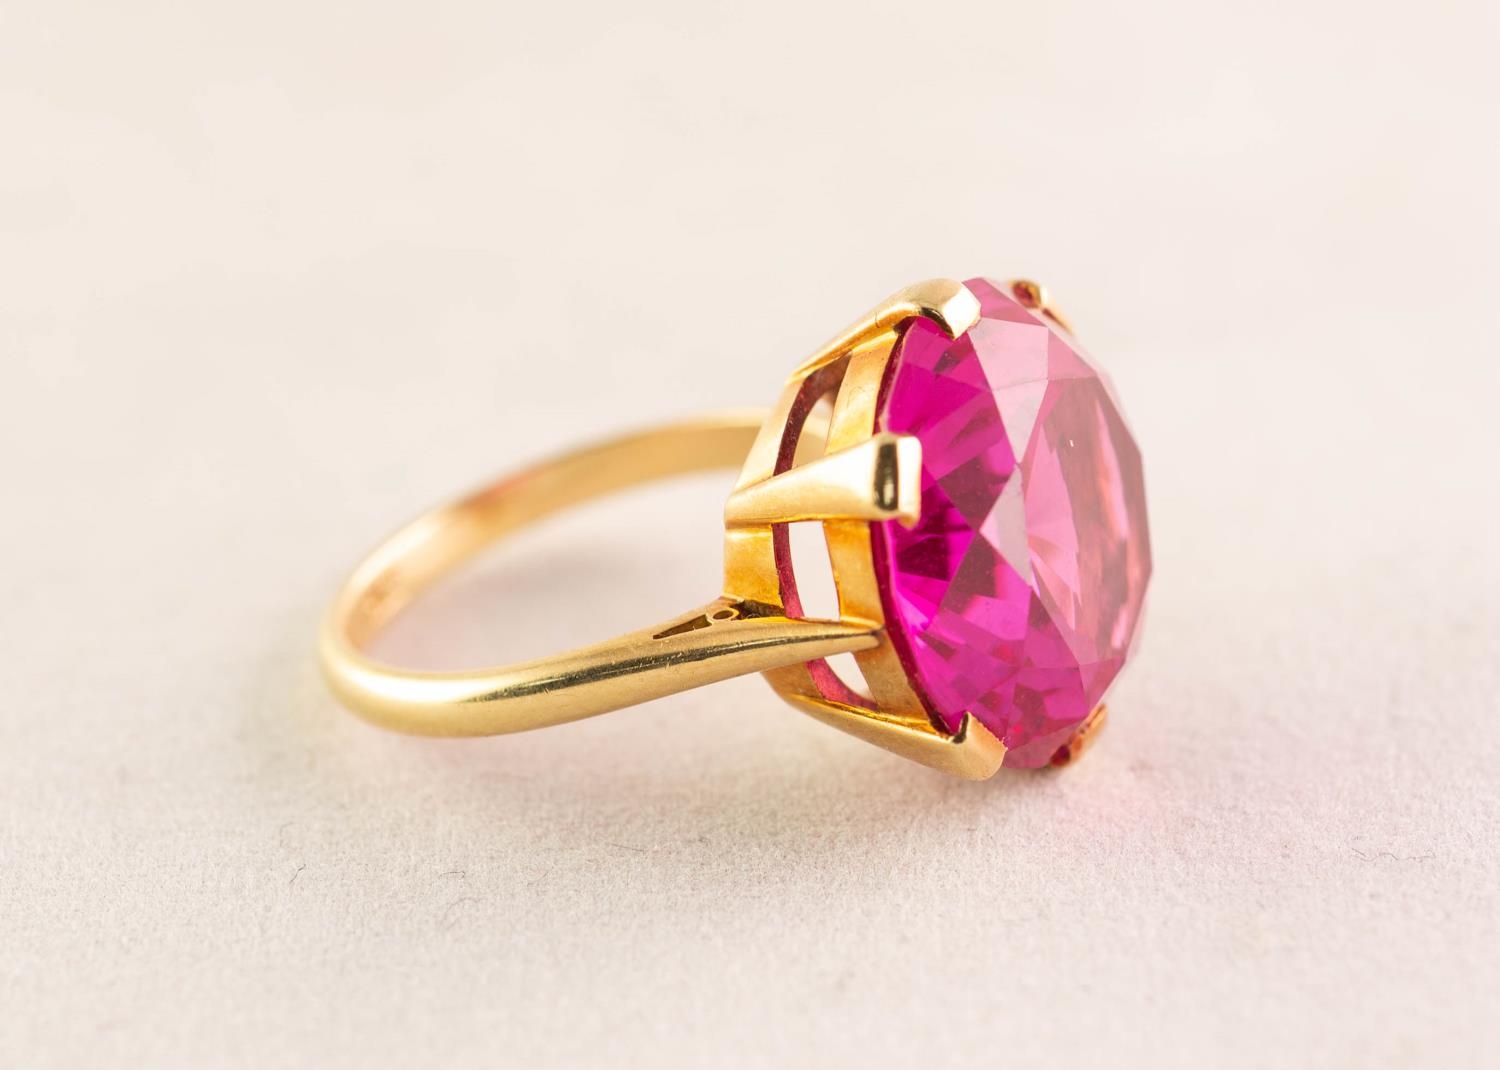 18ct GOLD DRESS RING SET WITH AN ATTRACTING AND LIVELY LARGE CIRCULAR PINK ZIRCON, 15mm diameter, - Image 2 of 4